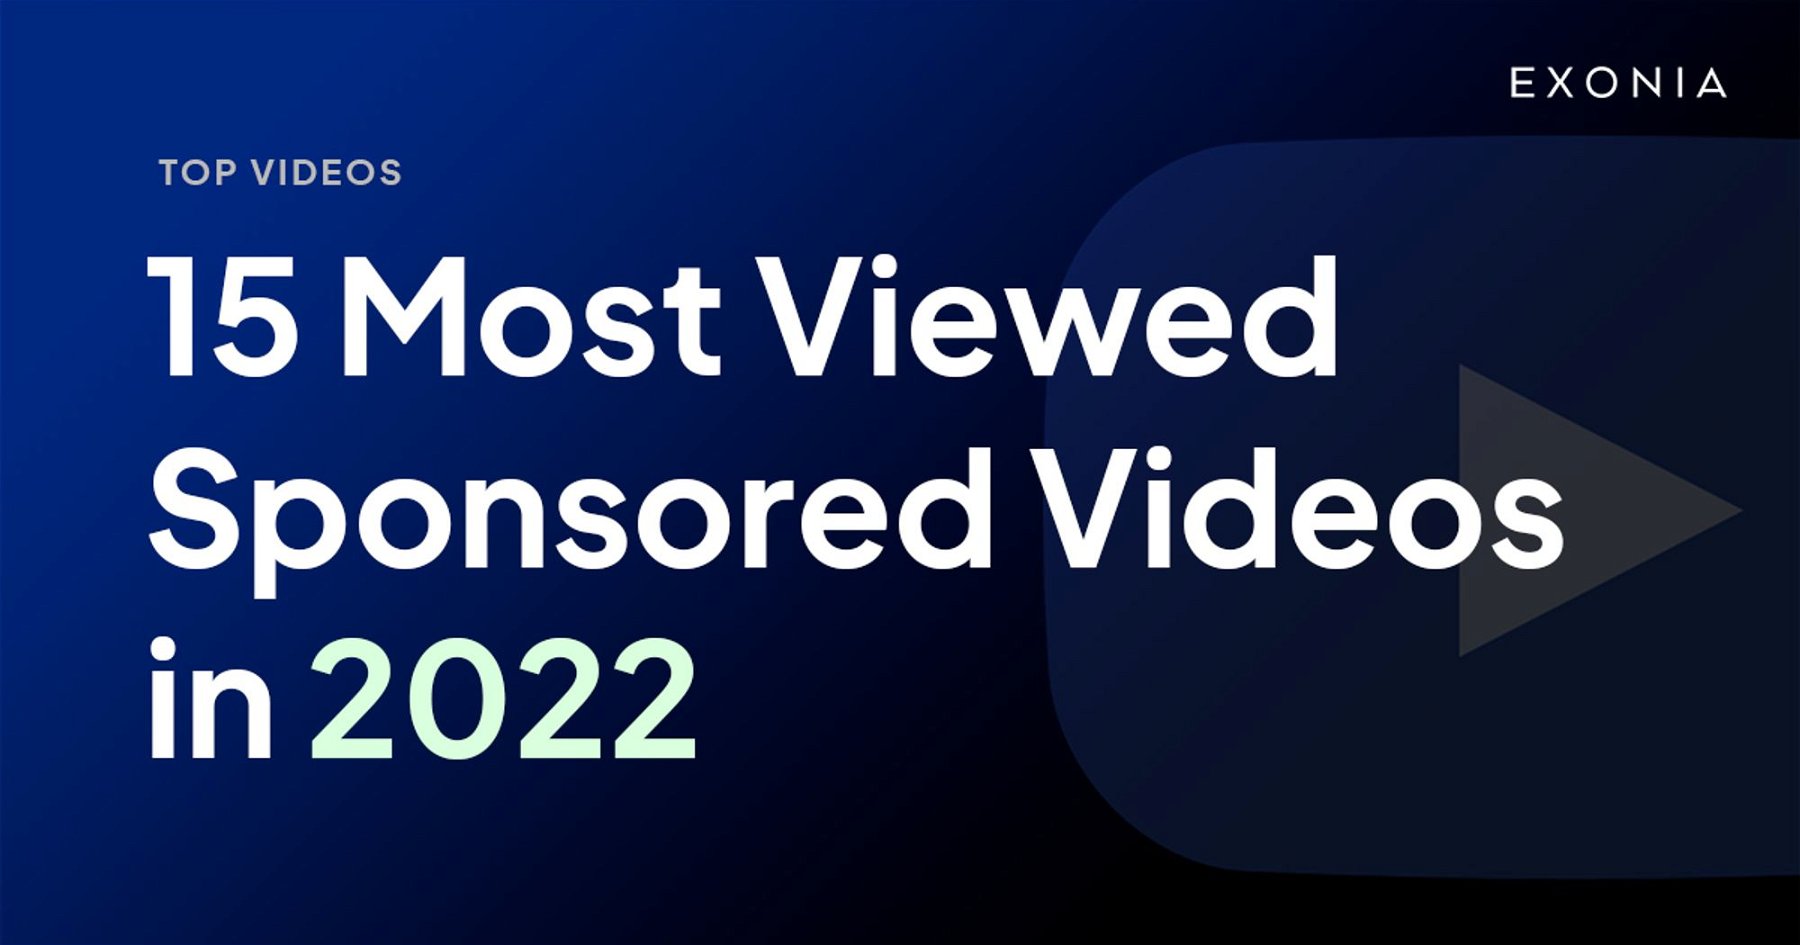 15 Most Viewed Sponsored YouTube Videos in 2022